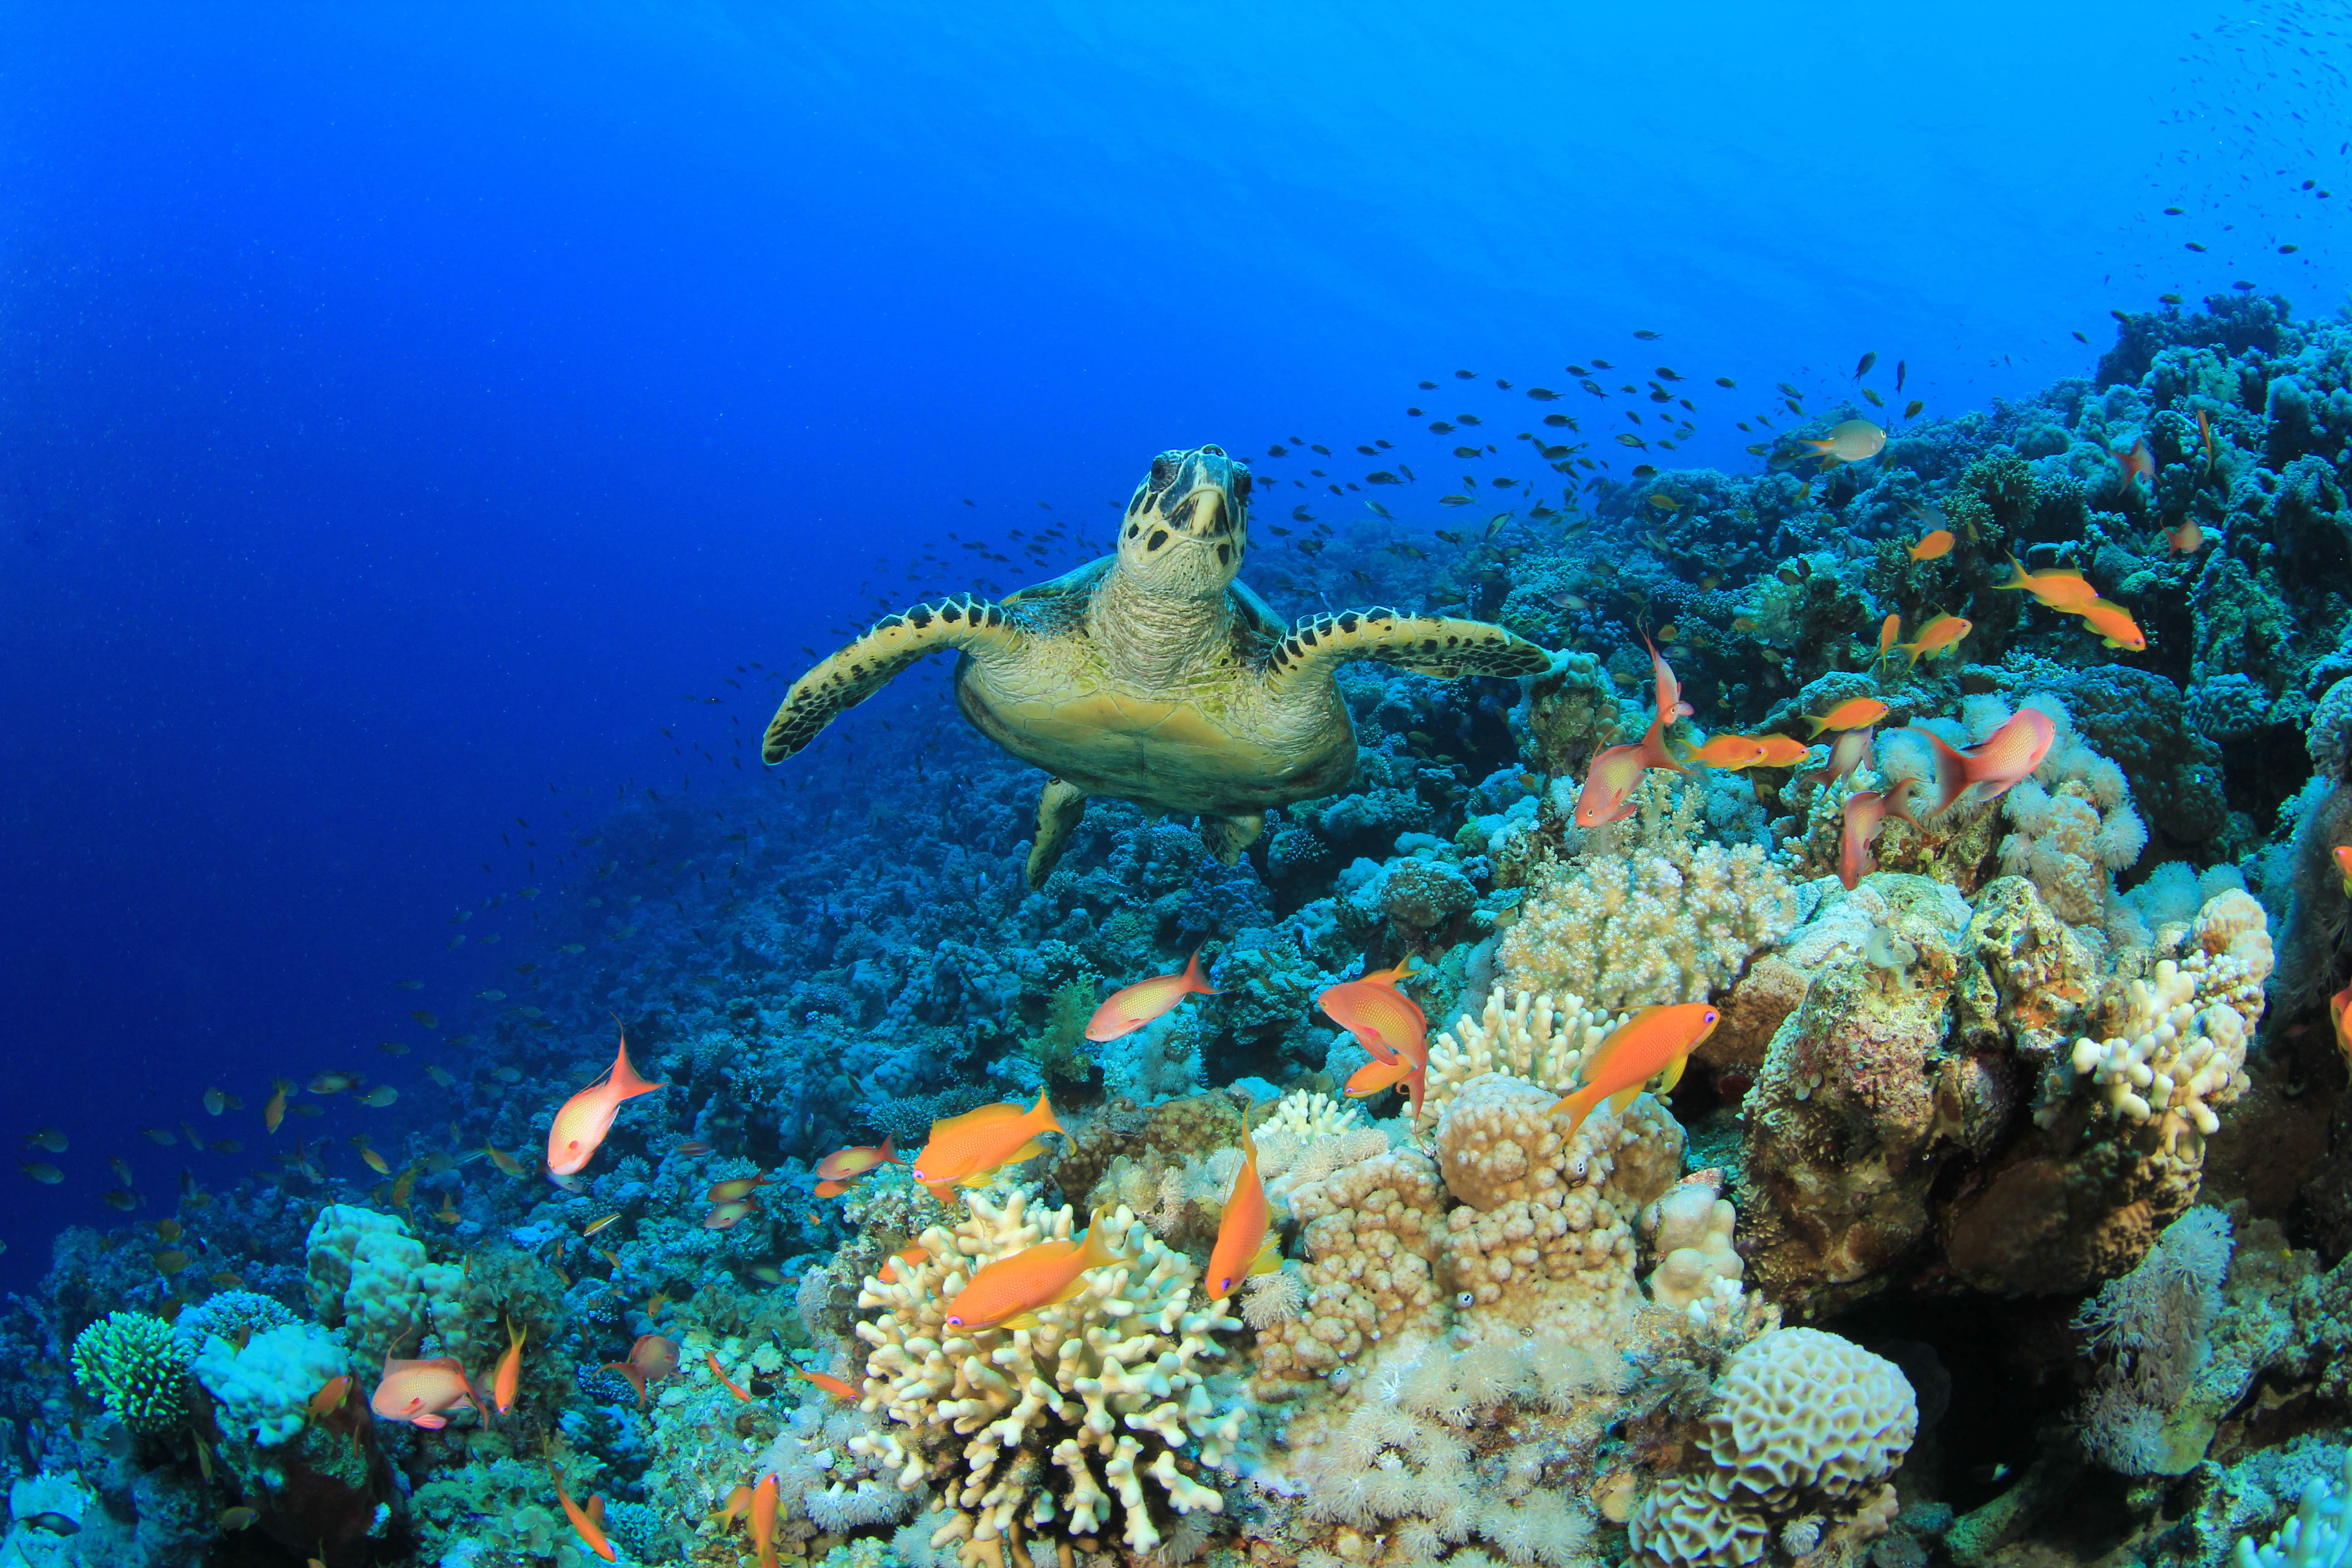 Explore our Marine Protected Areas